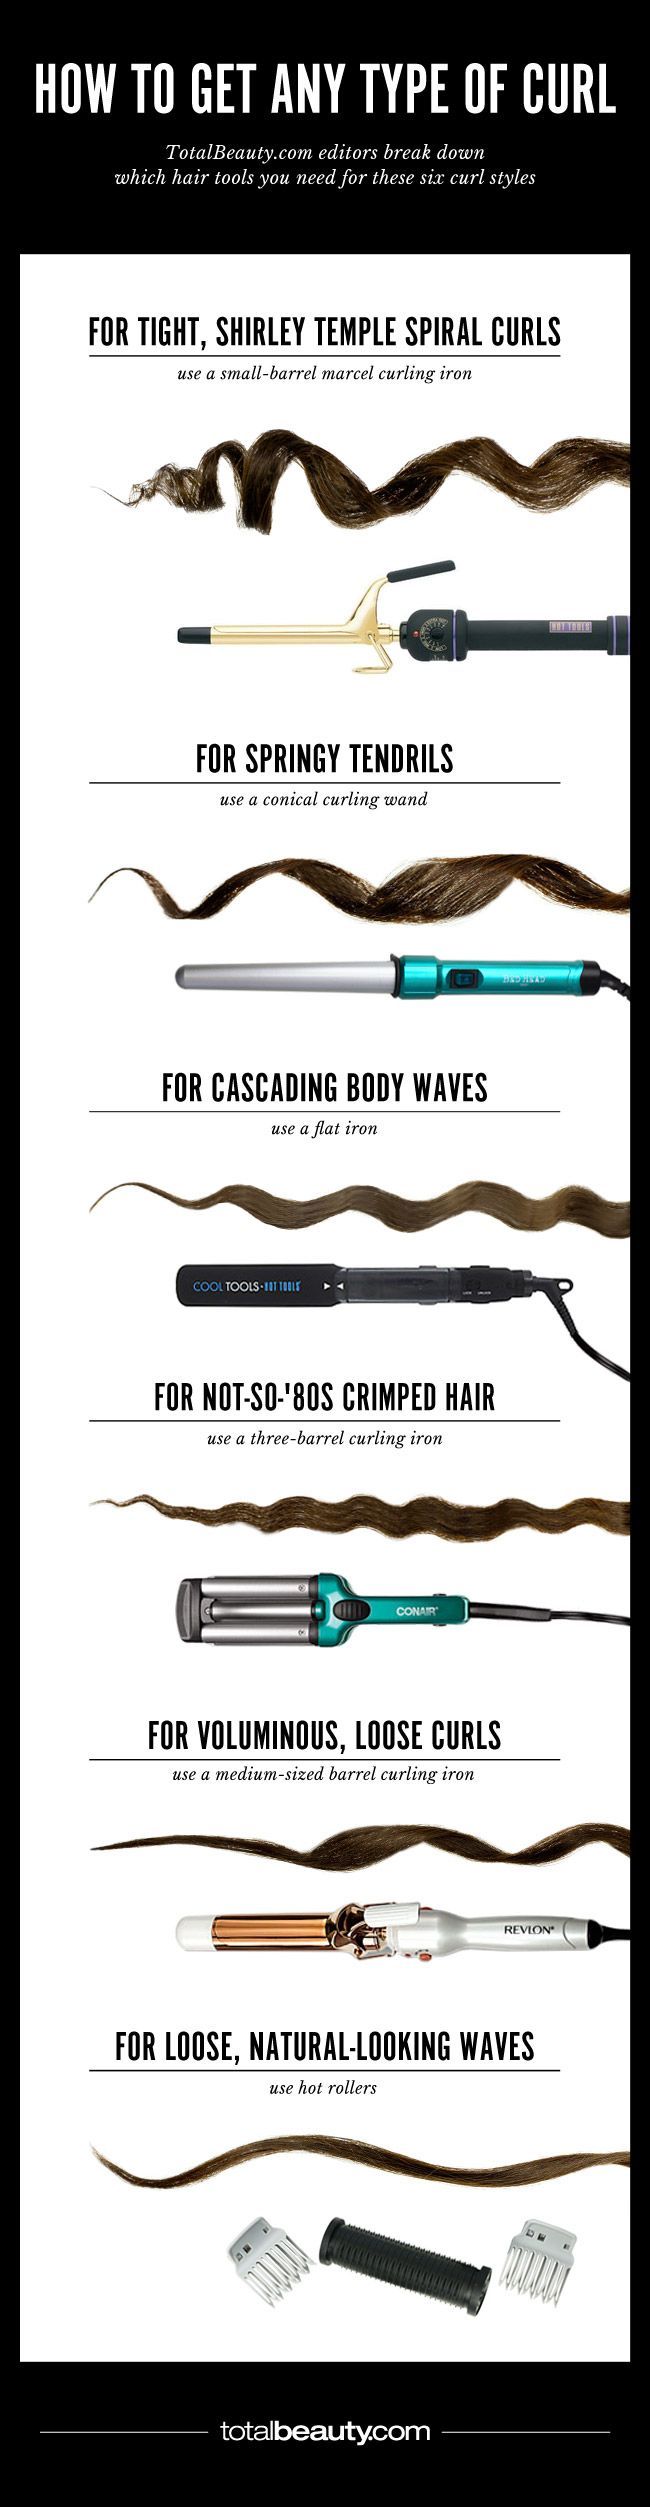 6 Curling Irons For Any Type Of Curl | Beauty Tips And Hairstyle Ideas by Makeup...